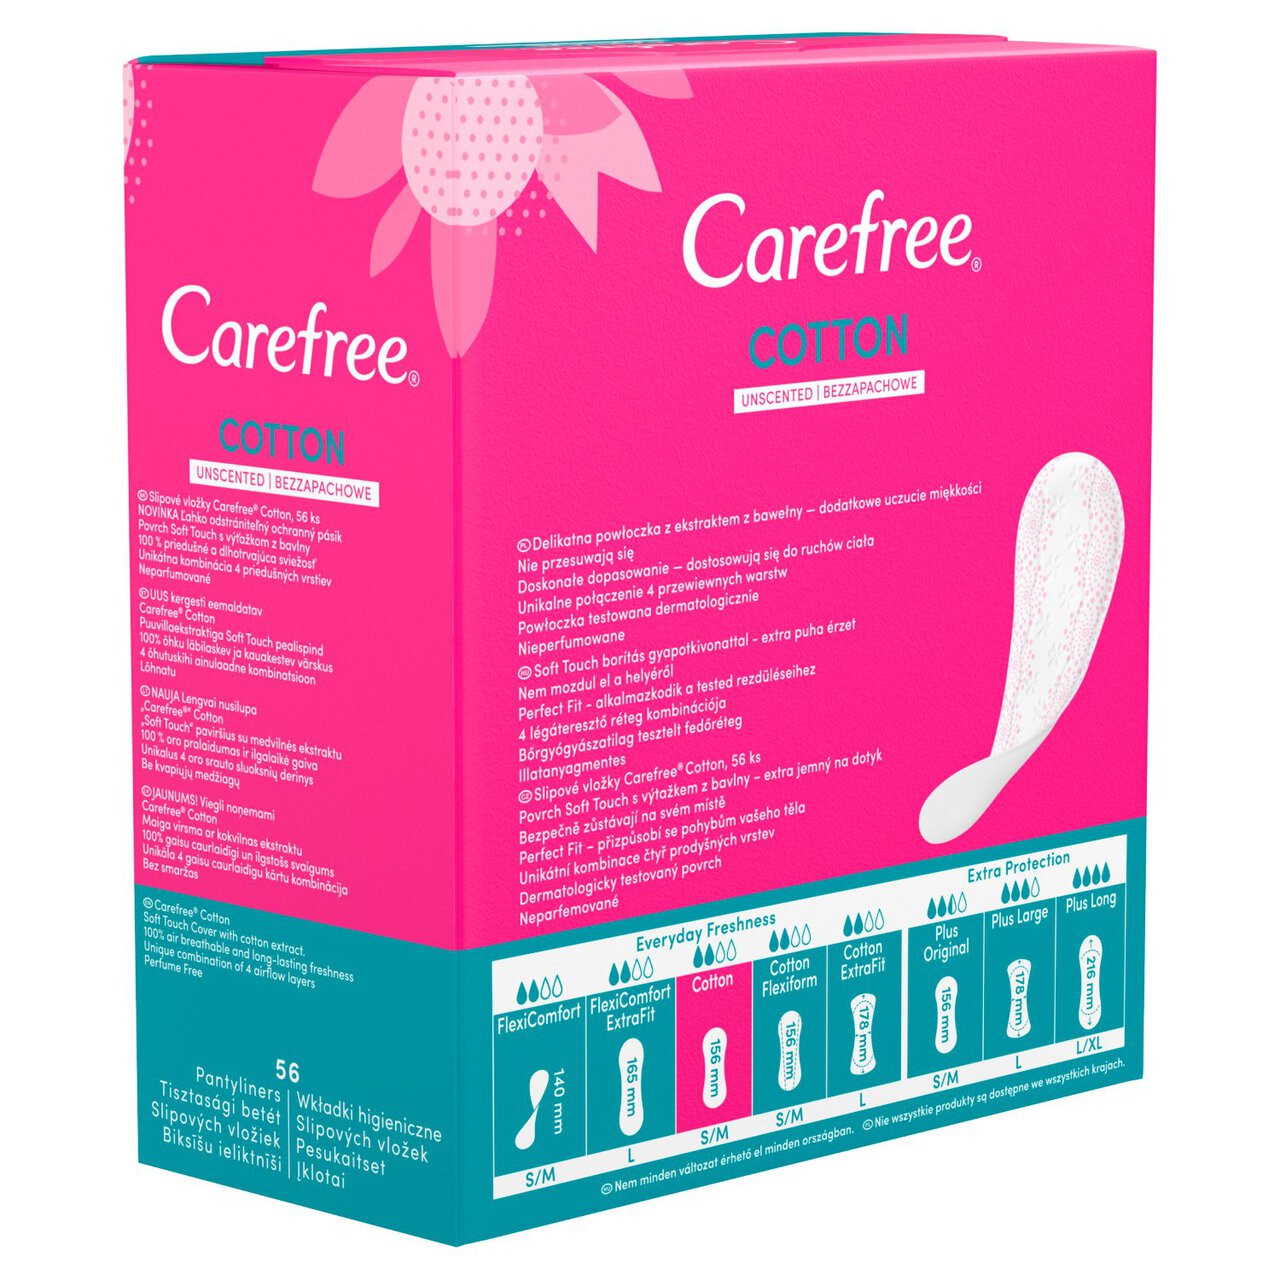 Carefree Cotton Breathable Pantyliners 56 per pack